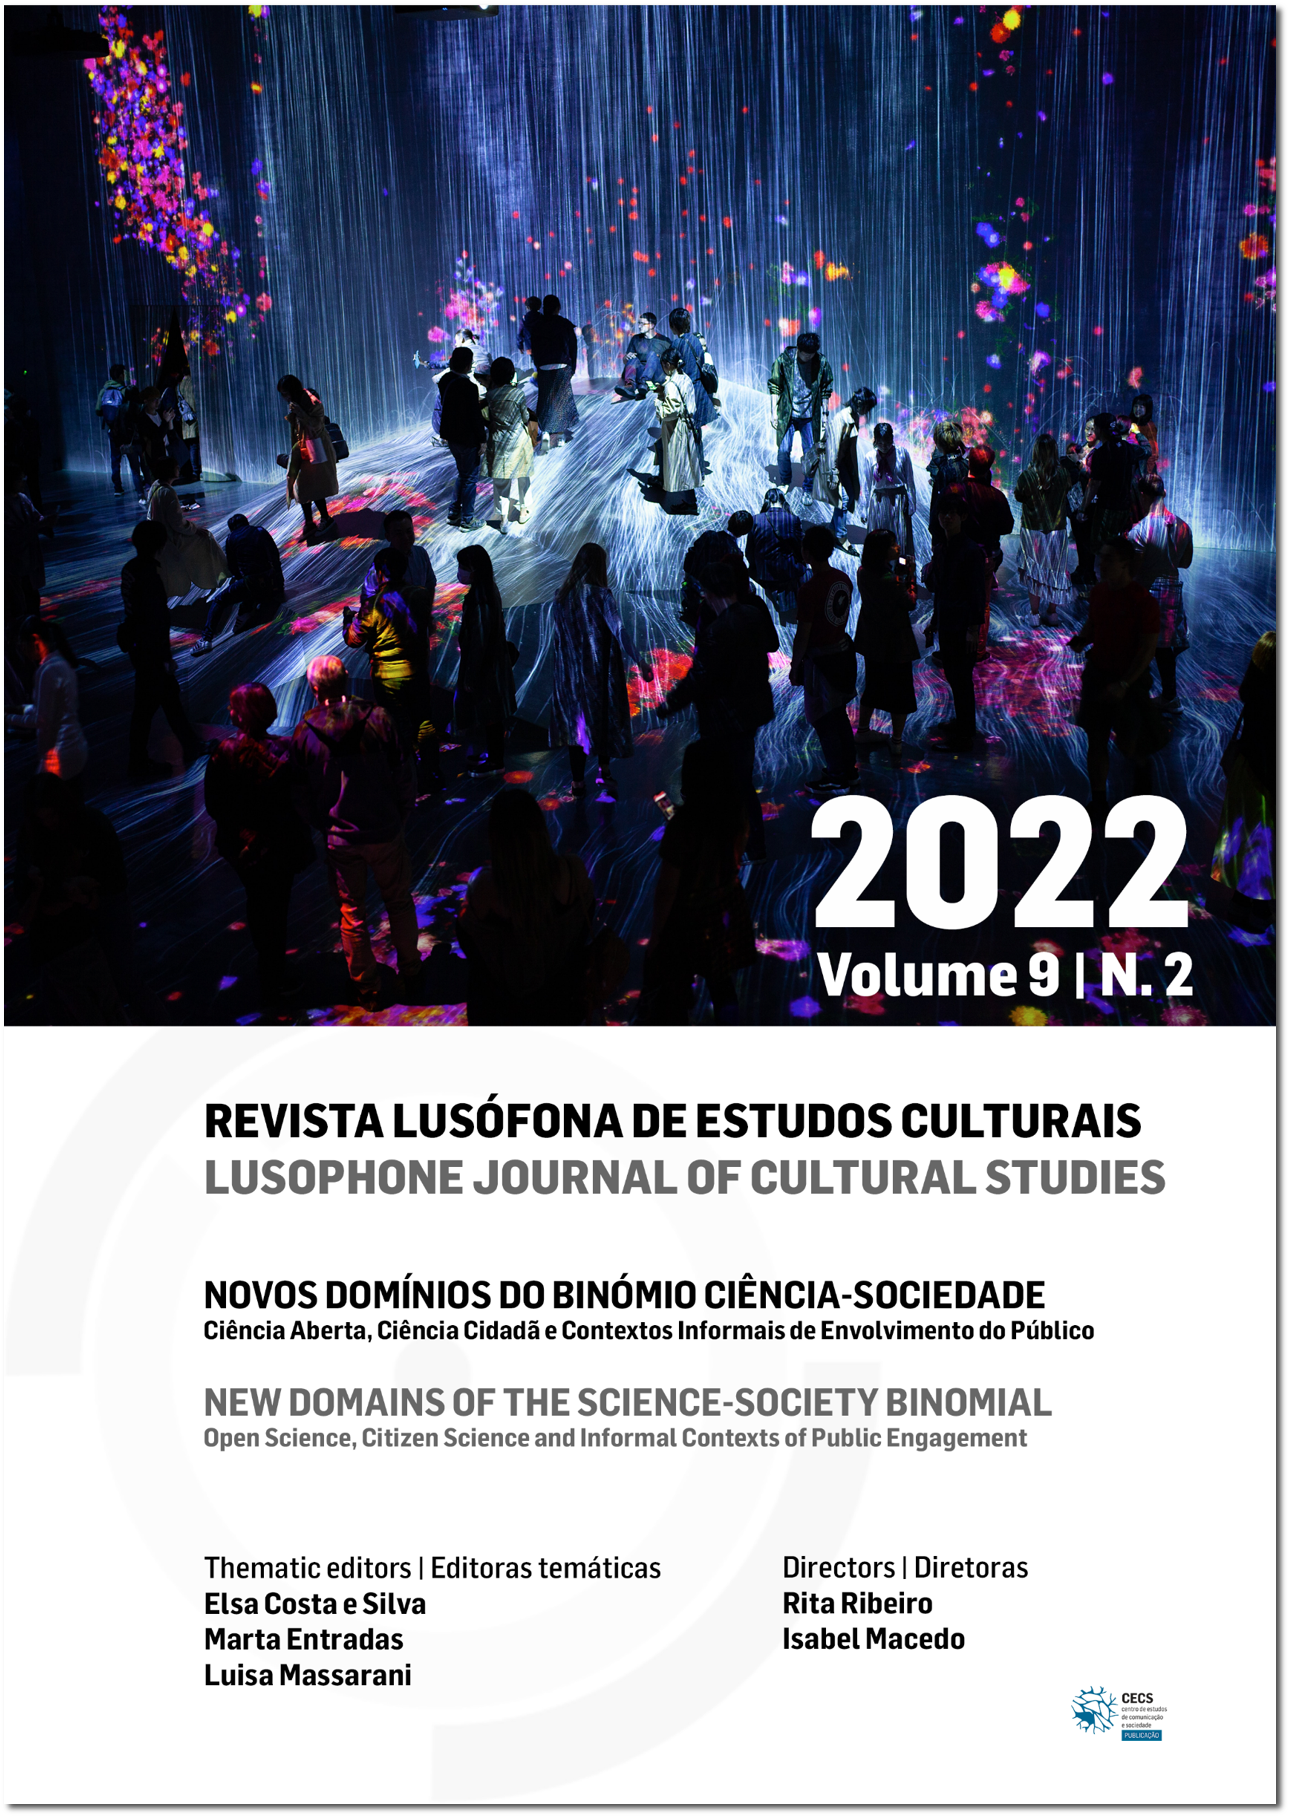 					View Vol. 9 No. 2 (2022): New Domains of the Science-Society Binomial Open Science, Citizen Science and Informal Contexts of Public Engagement 
				